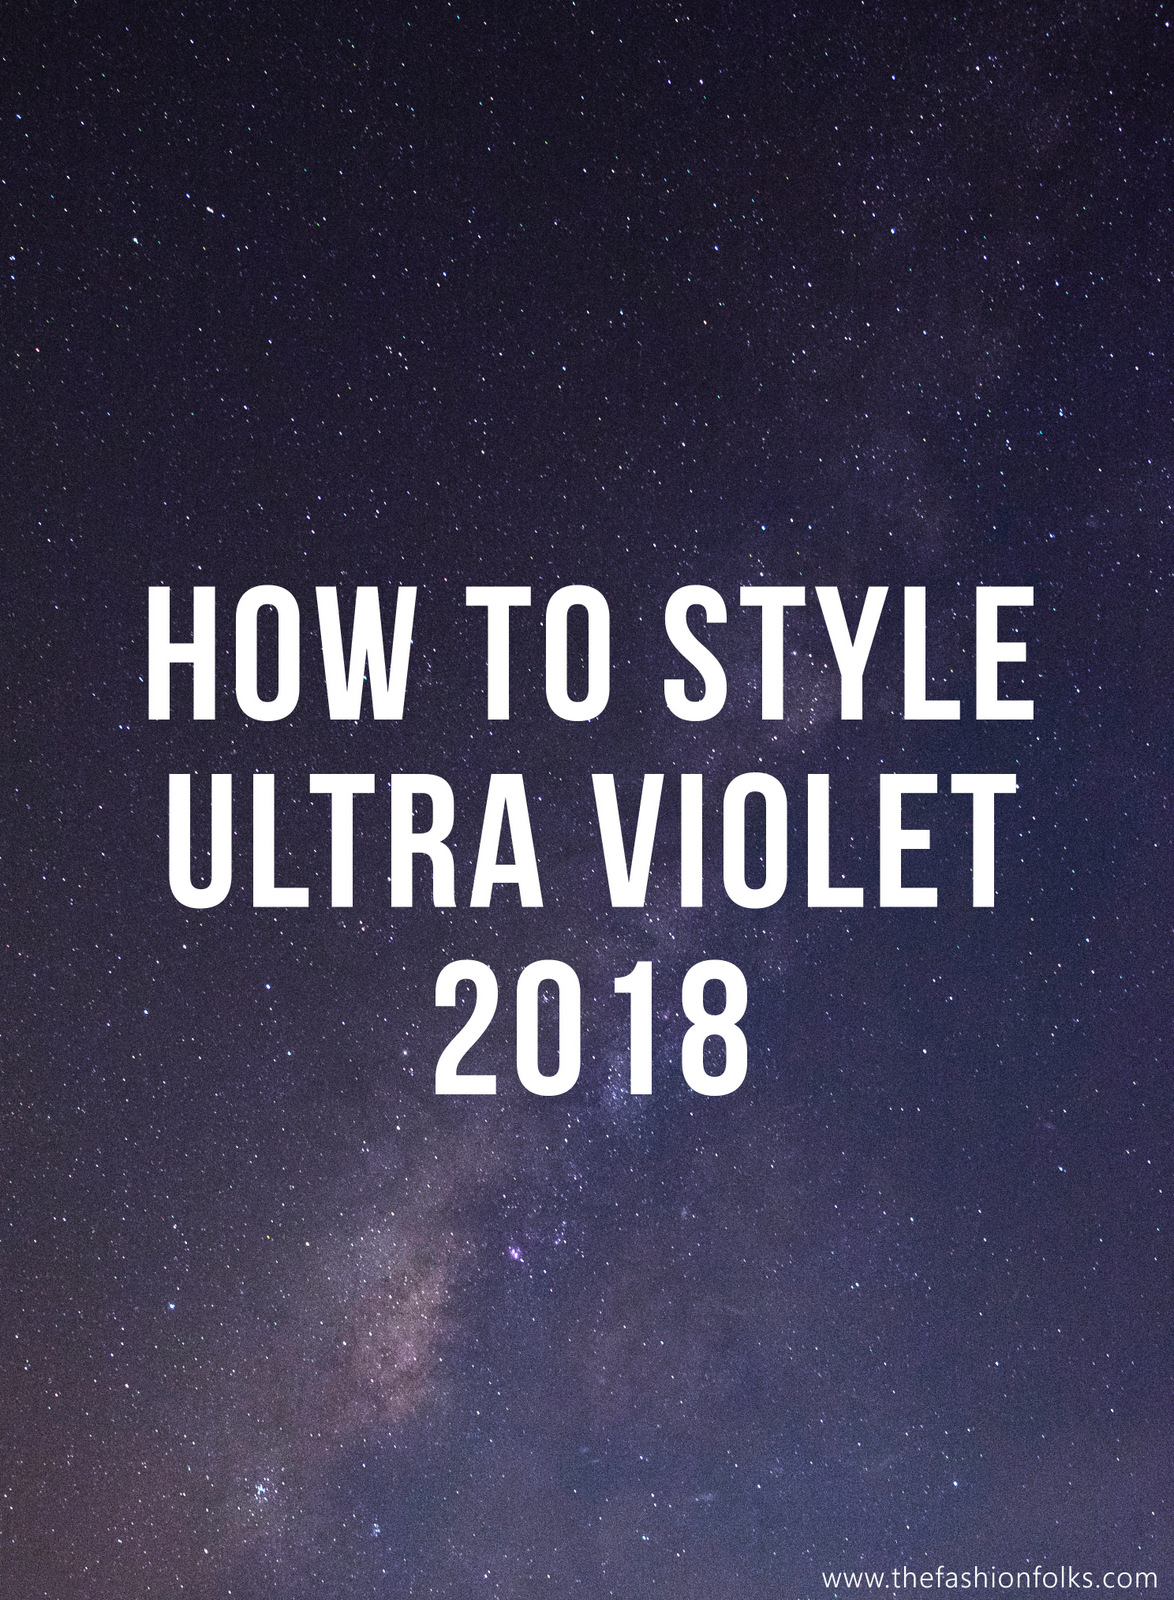 How To Style Ultra Violet 2018